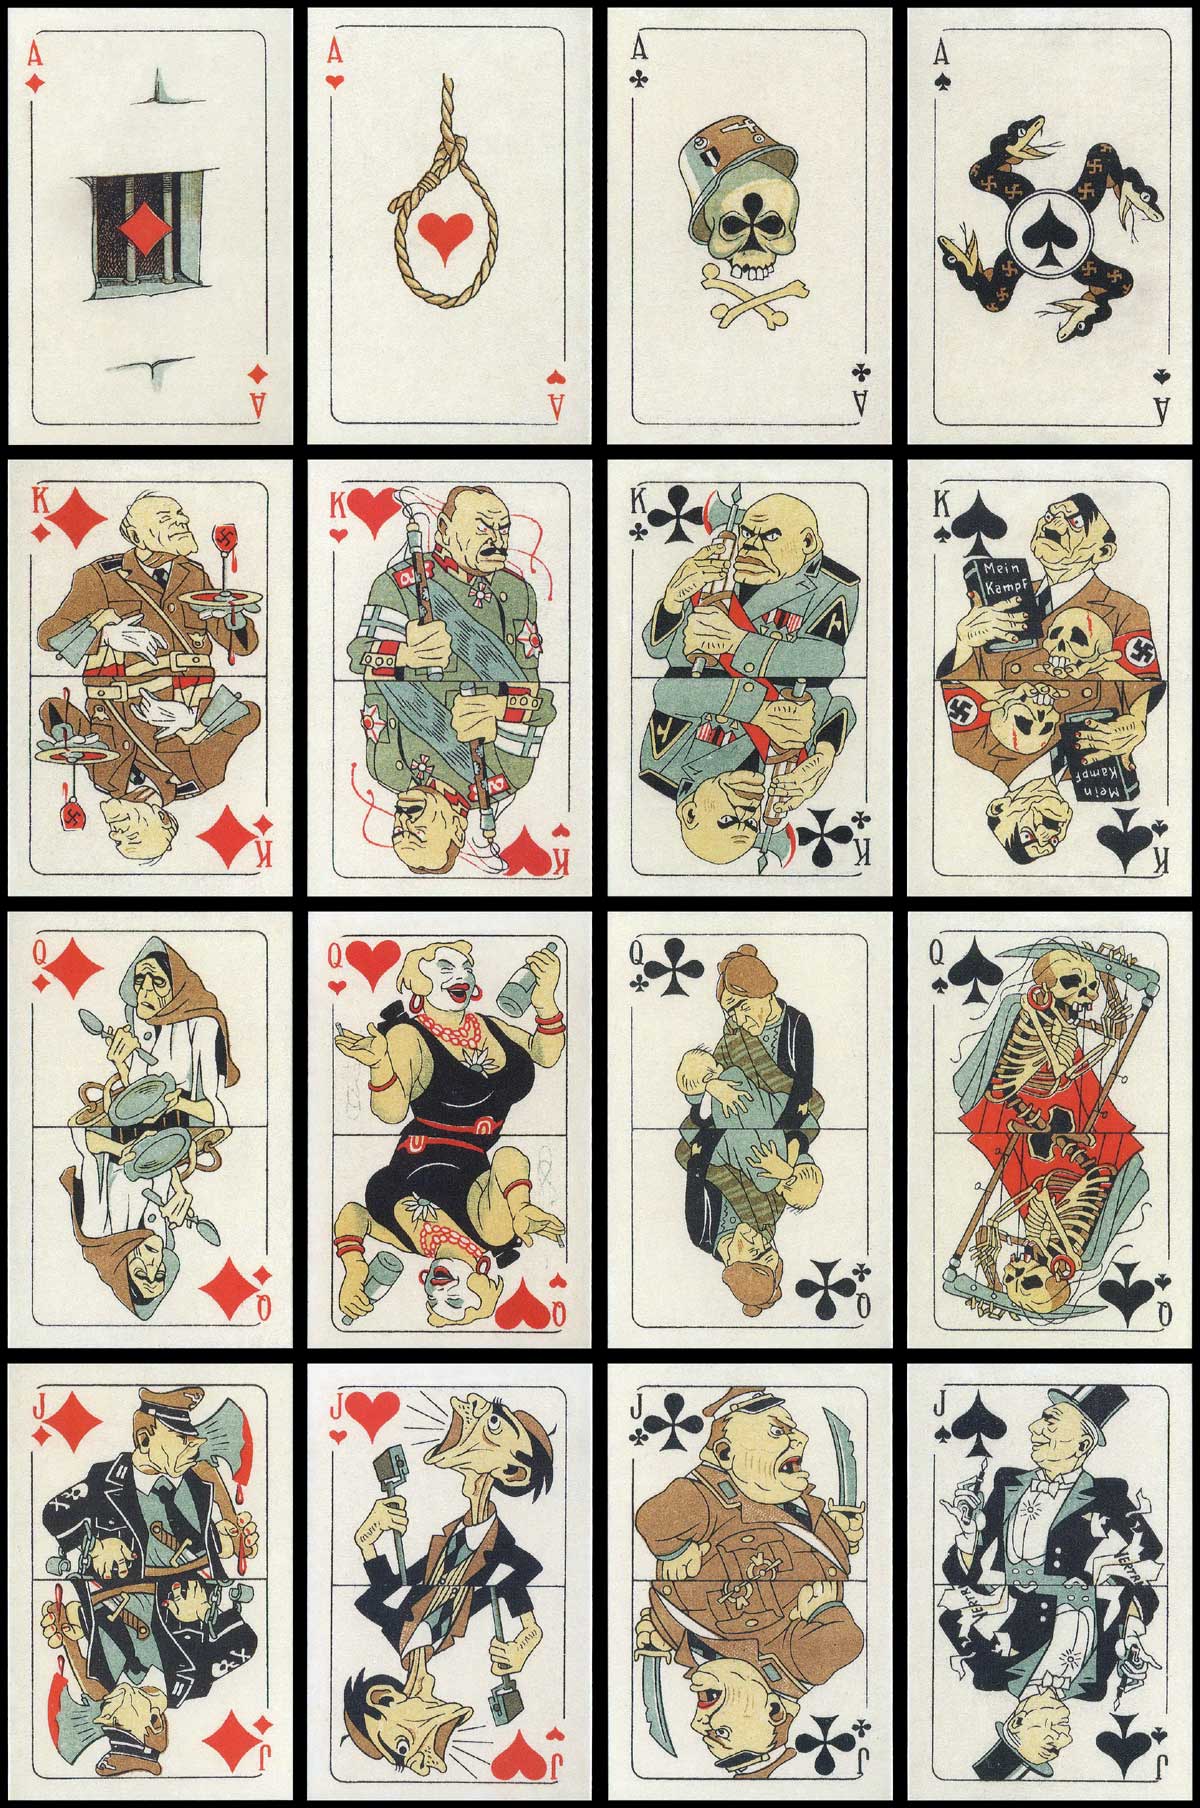 re-print of the Anti-fascist playing cards published by Peterhof State Museum, 2010